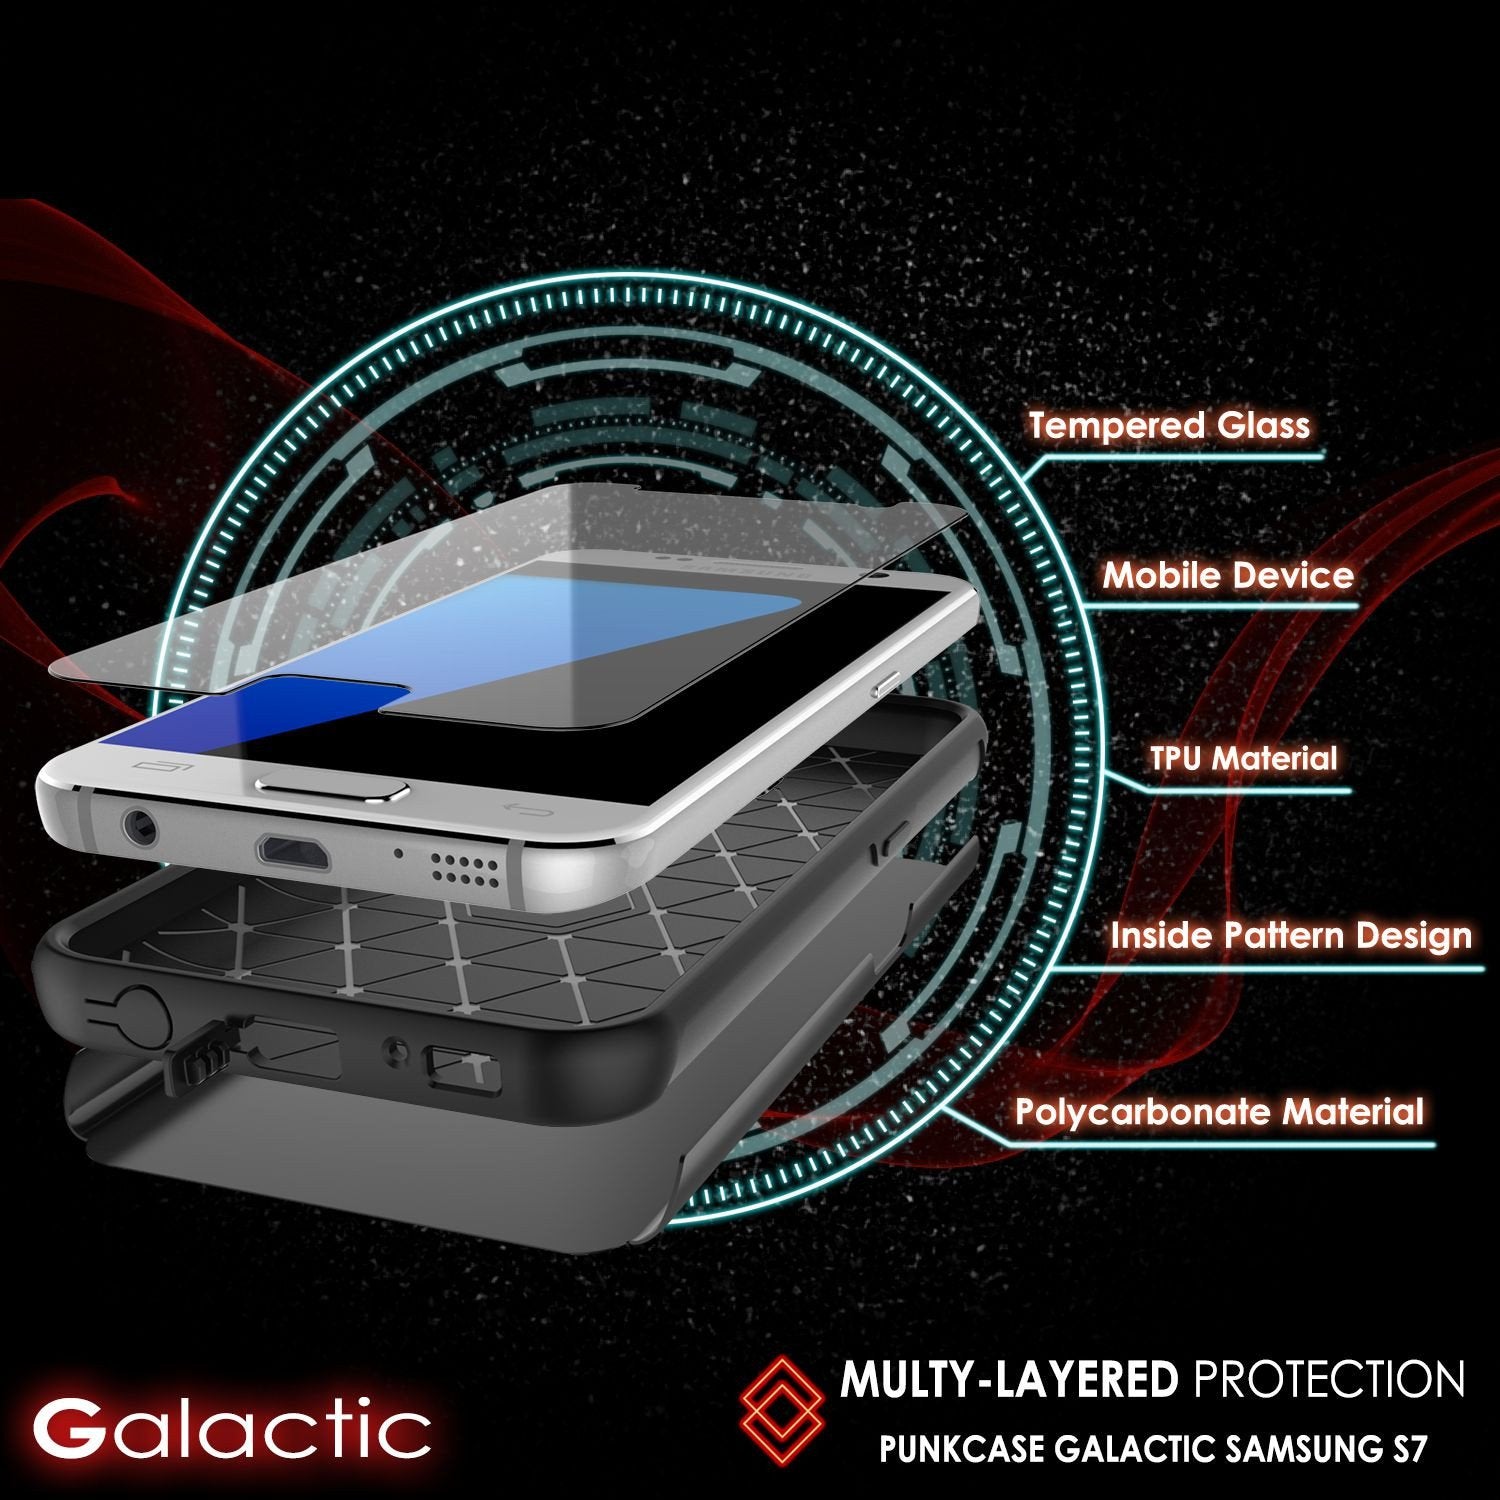 Galaxy s7 Case PunkCase Galactic Black Series Slim Armor Soft Cover Case w/ Tempered Glass